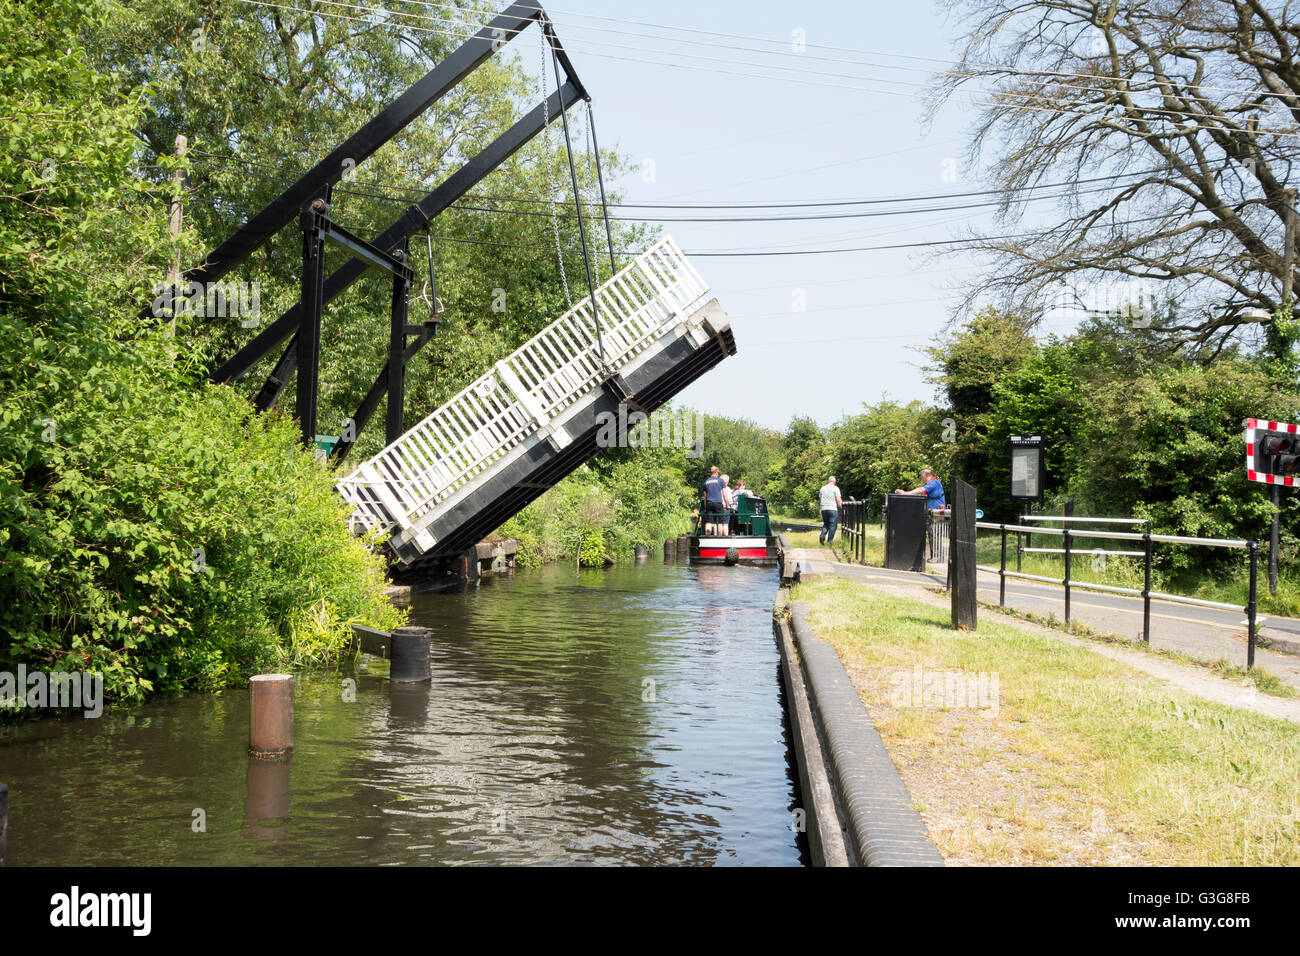 Shirley swing Bridge, which is commonly called a lift bridge, on the North Stratford Canal Stock Photo